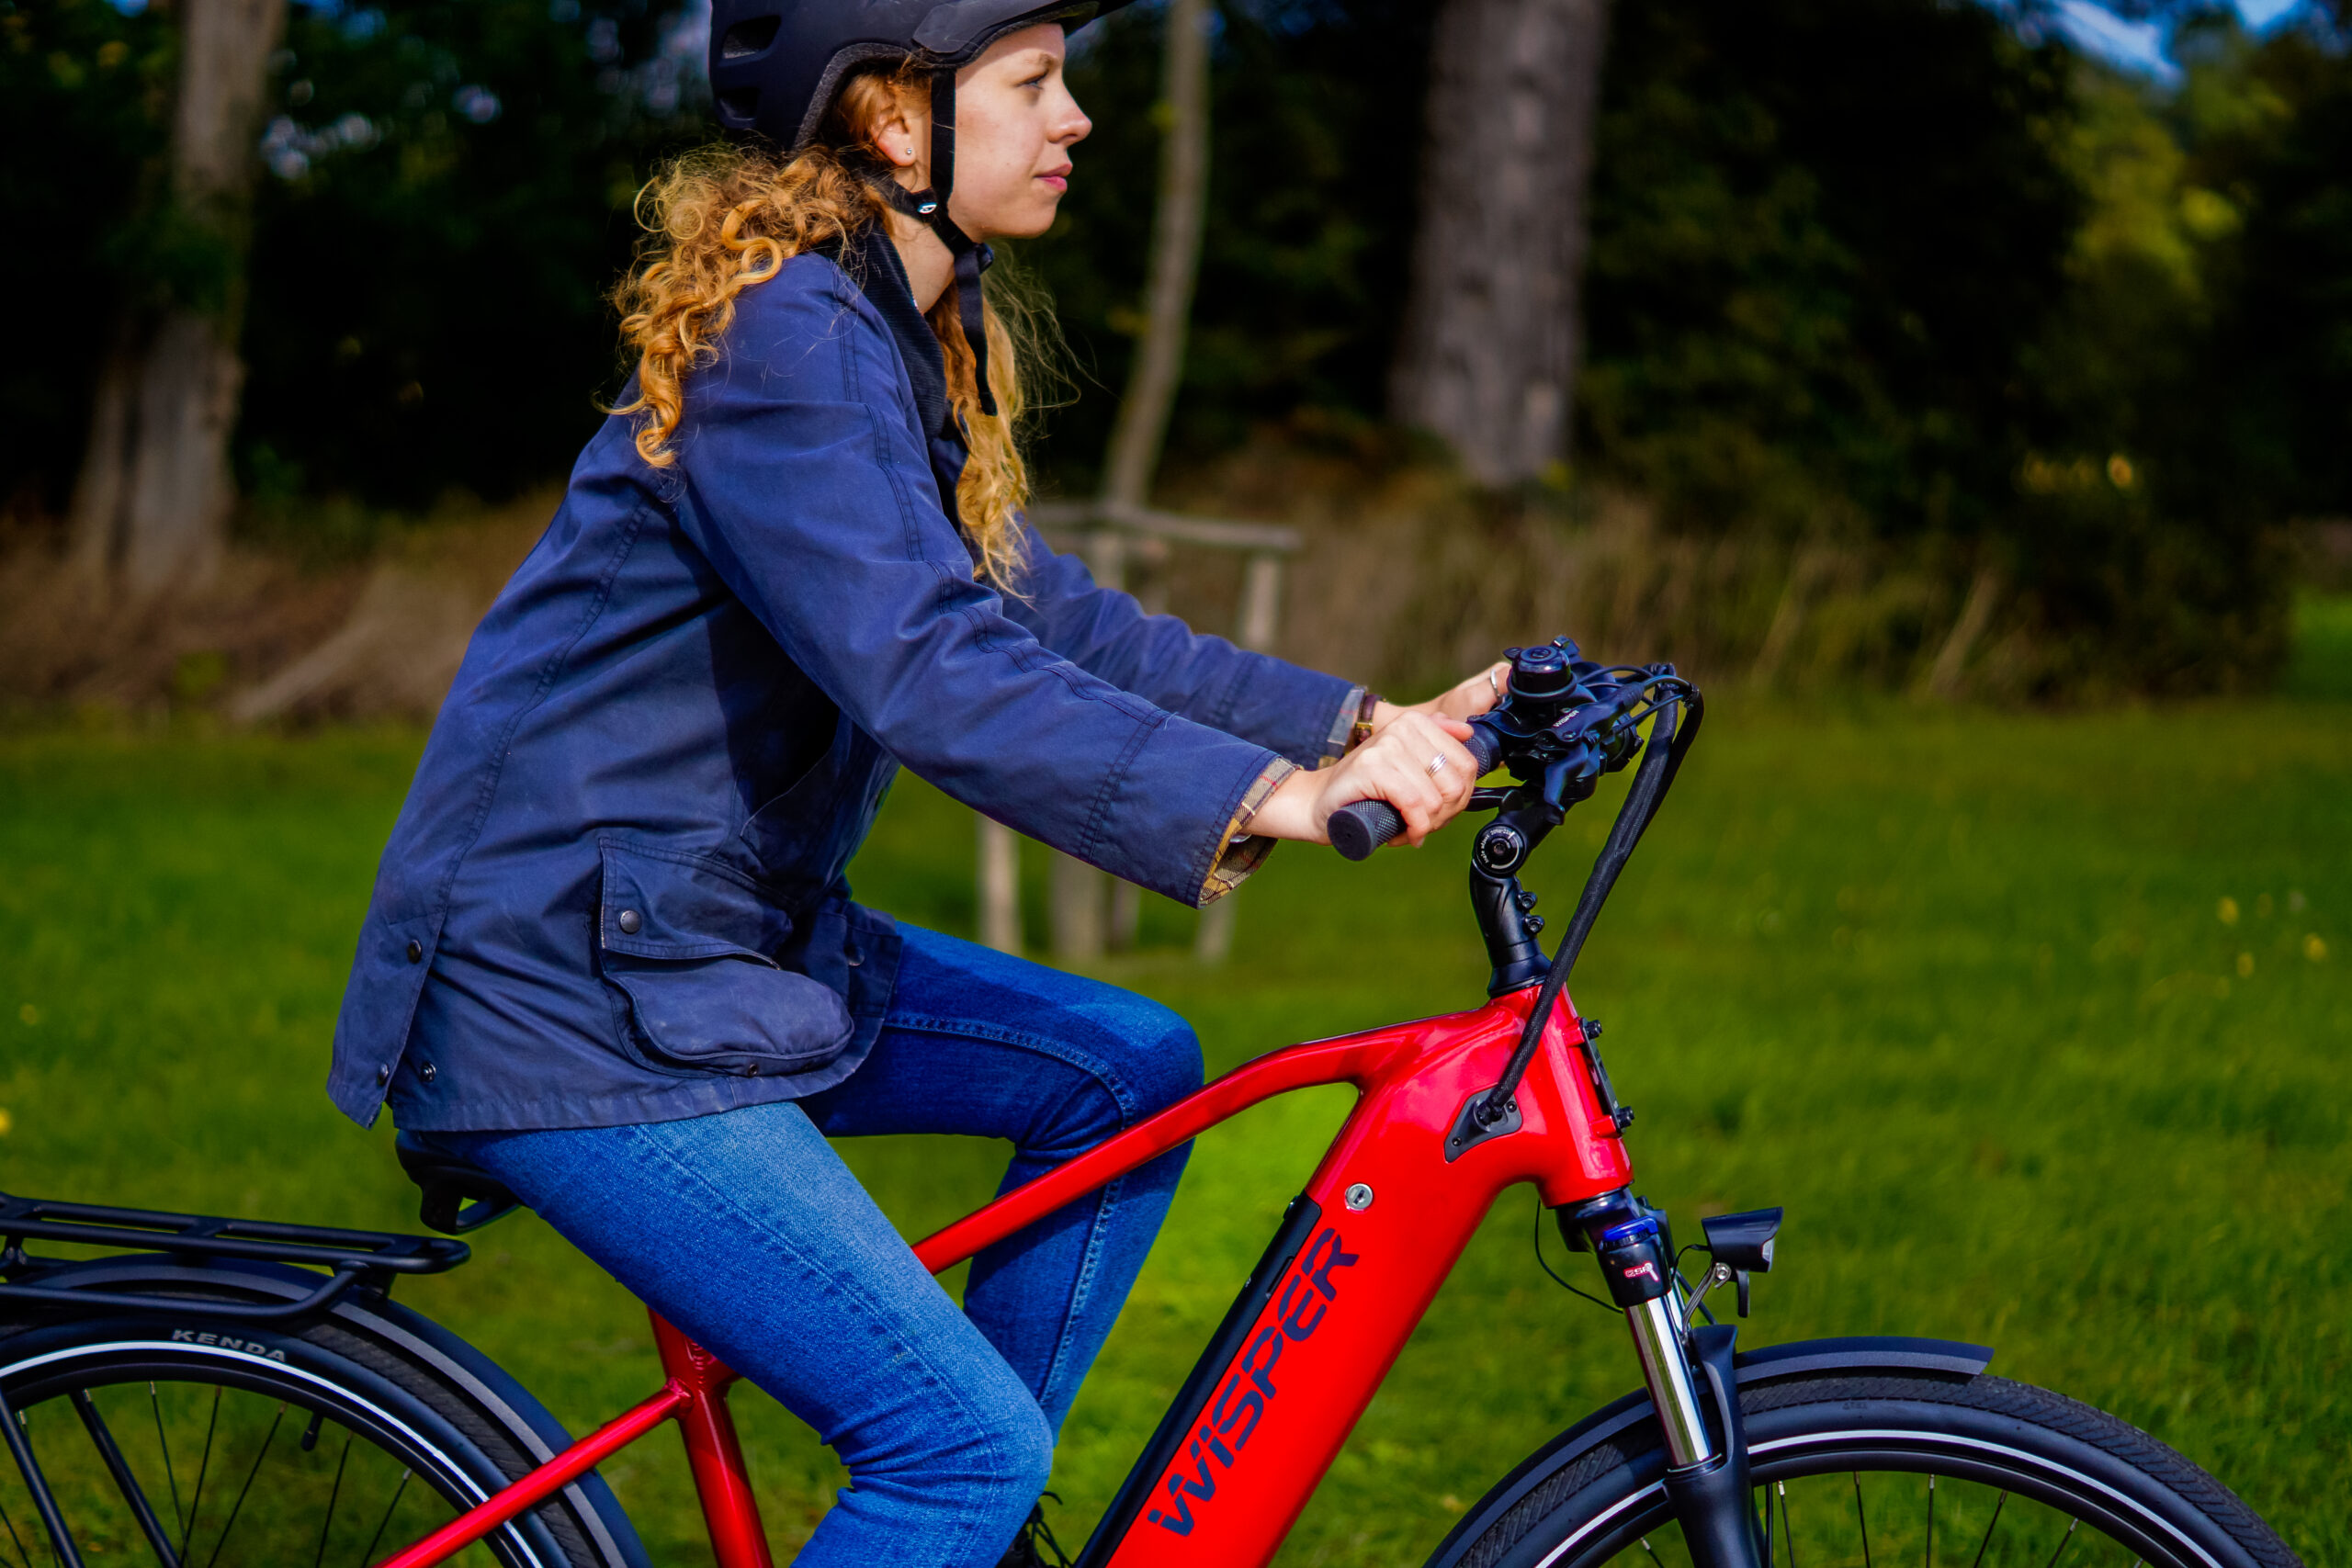 woman riding on a red ebike